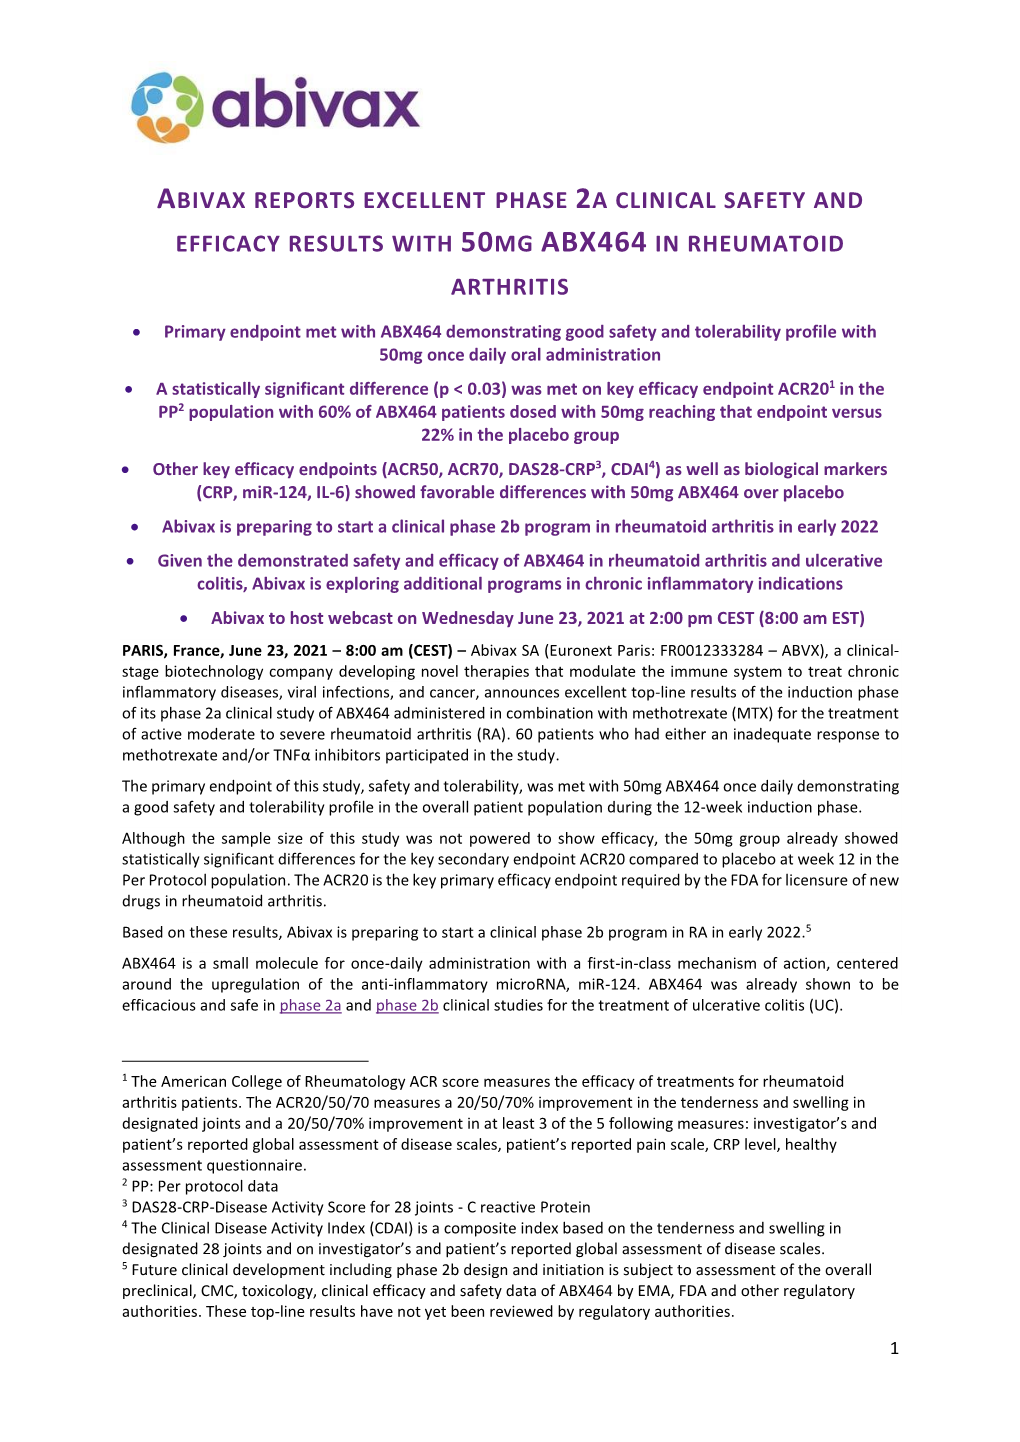 Abivax Reports Excellent Phase 2A Clinical Safety and Efficacy Results with 50Mg Abx464 in Rheumatoid Arthritis